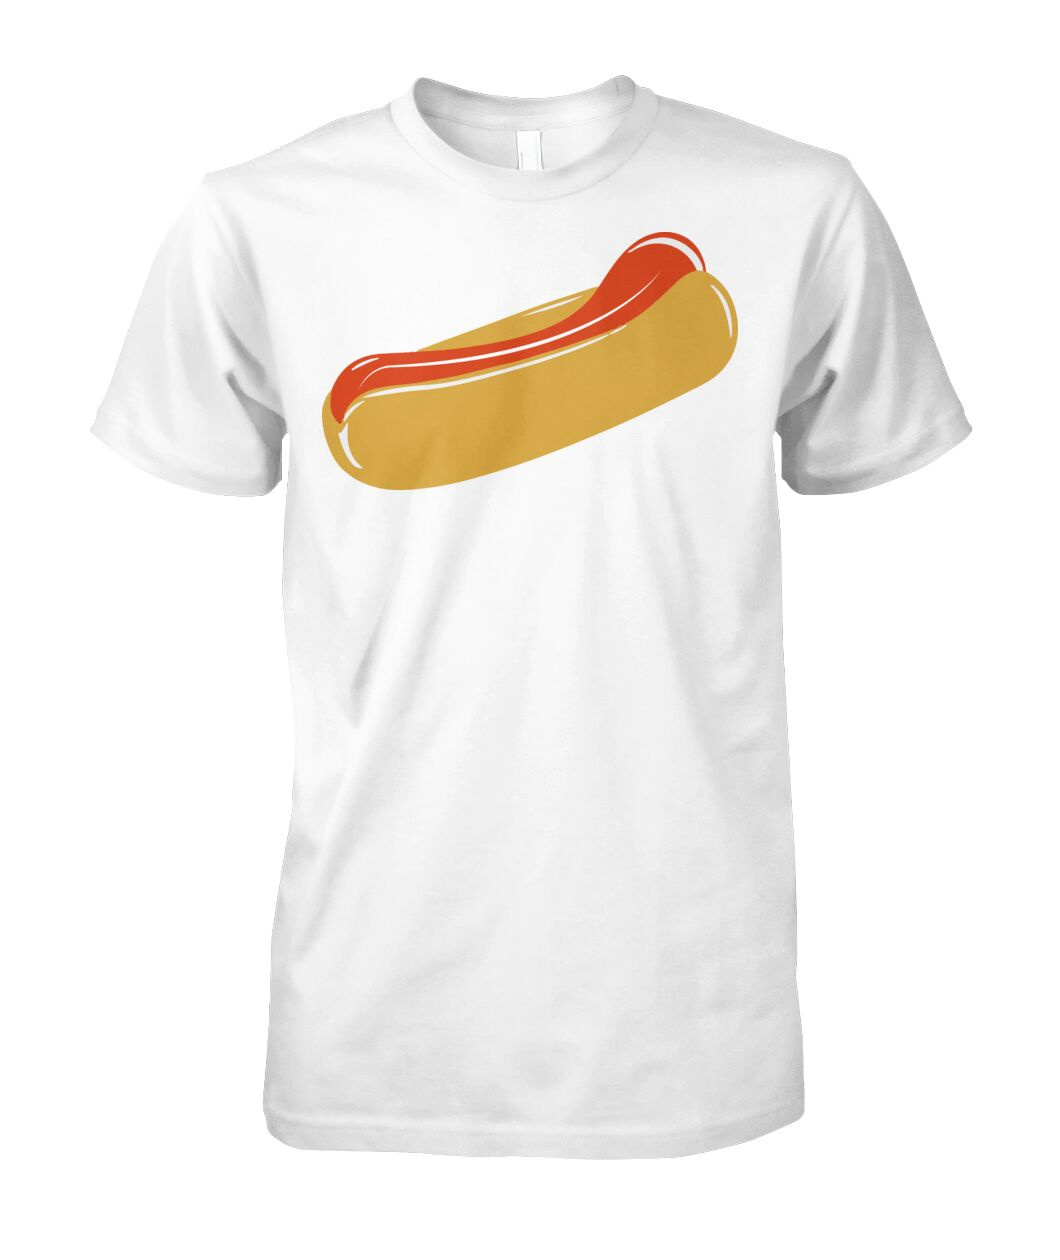 Captain Spaulding Hot Dog Shirt by The Daily Shirts on Dribbble